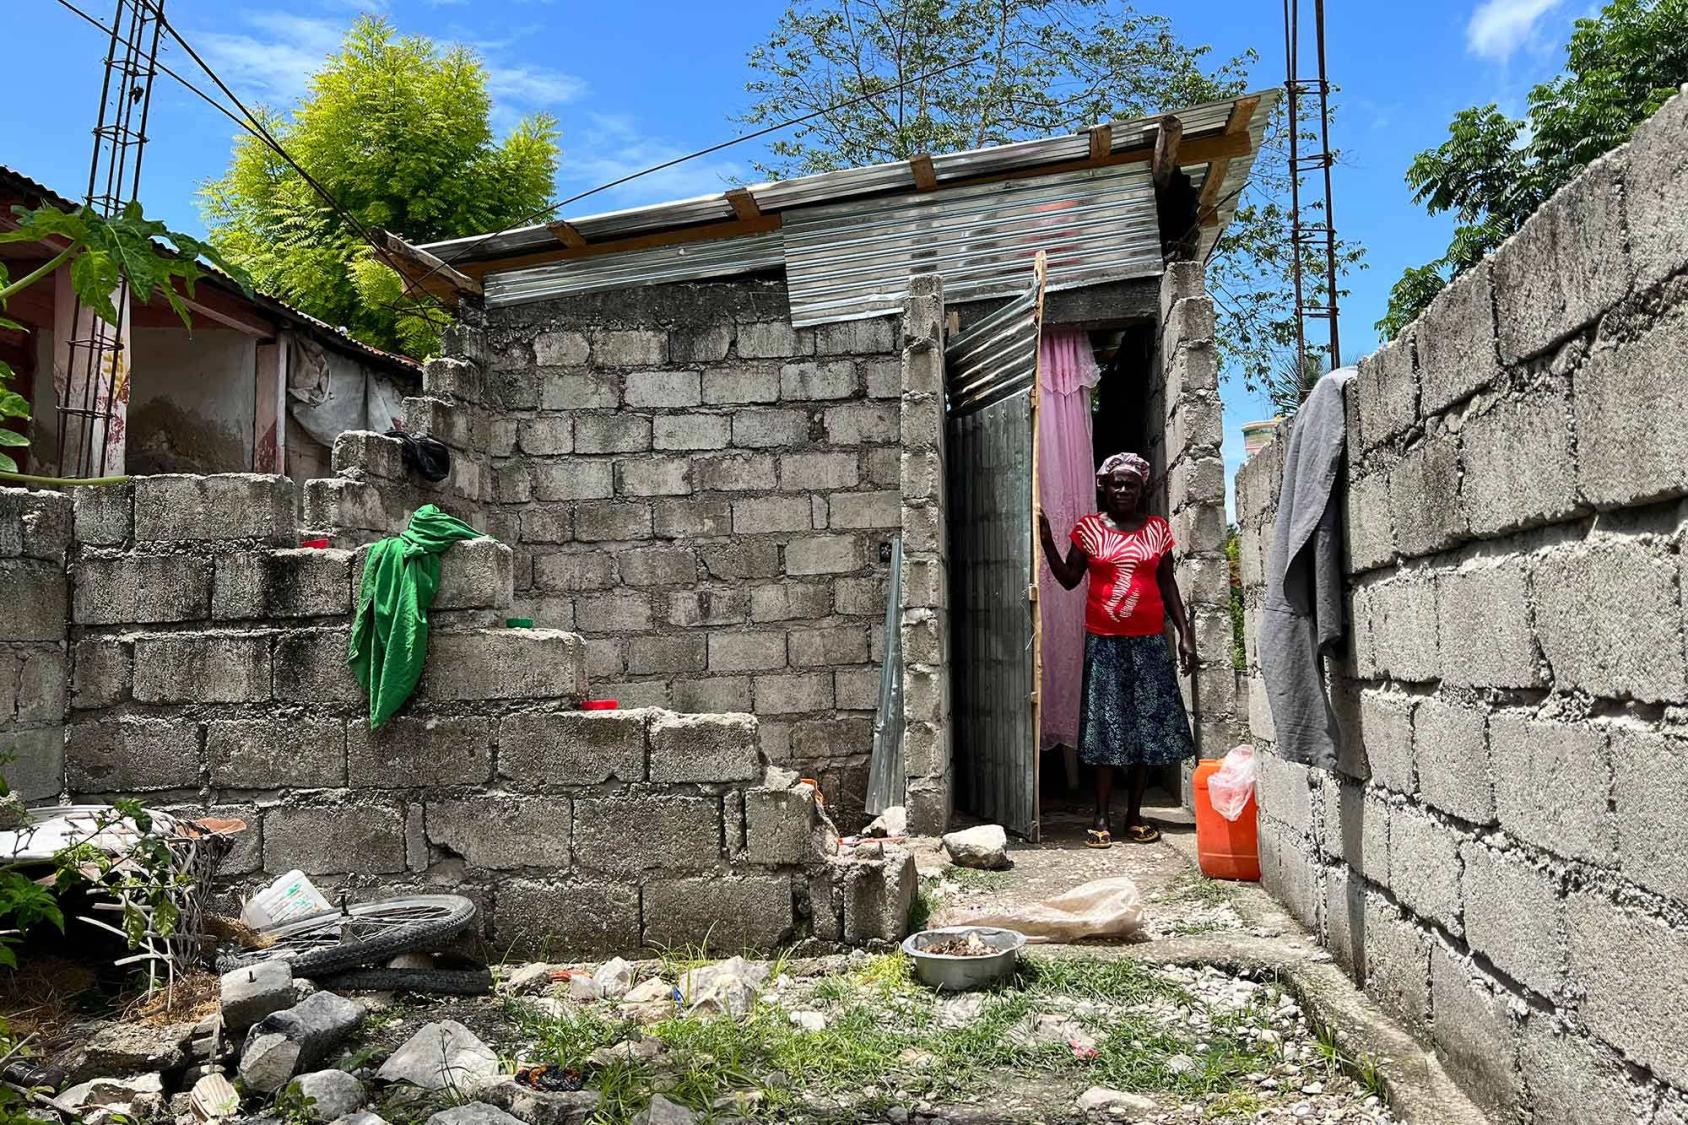 A Haitian woman stands in a doorway overlooking an outdoor courtyard enclosed by unpainted walls.